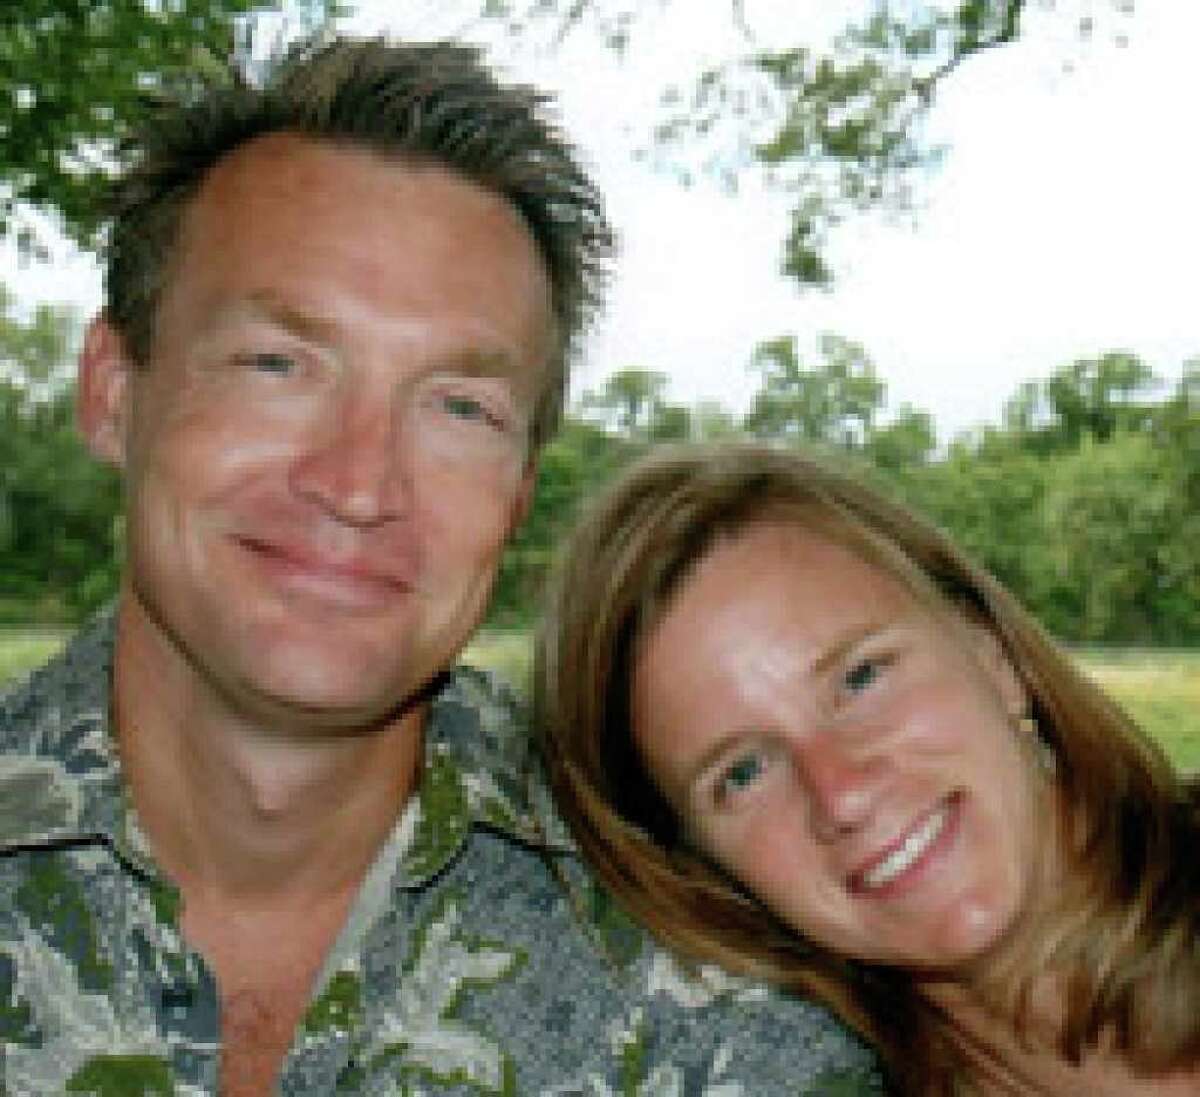 Gregory and Alexandra Bruehler, who were killed a year ago today, left behind a daughter who’s now 8.